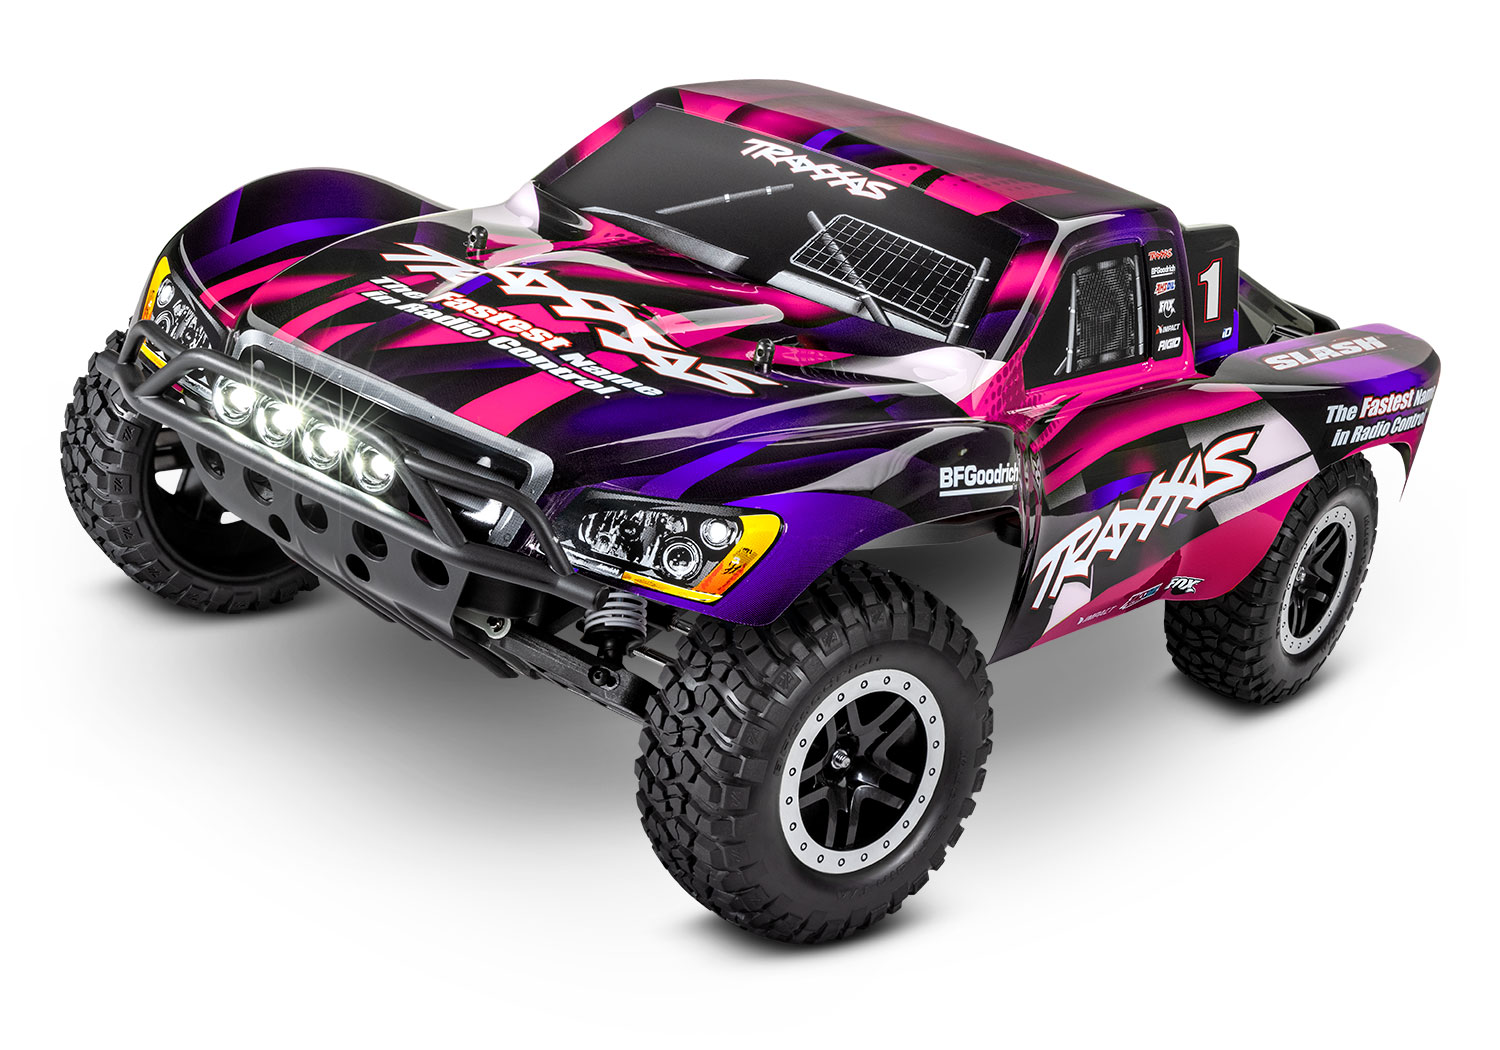 Traxxas Slash XL5 2WD short course truck RTR 2.4Ghz met LED verlichting inclusief Power Pack - Roze